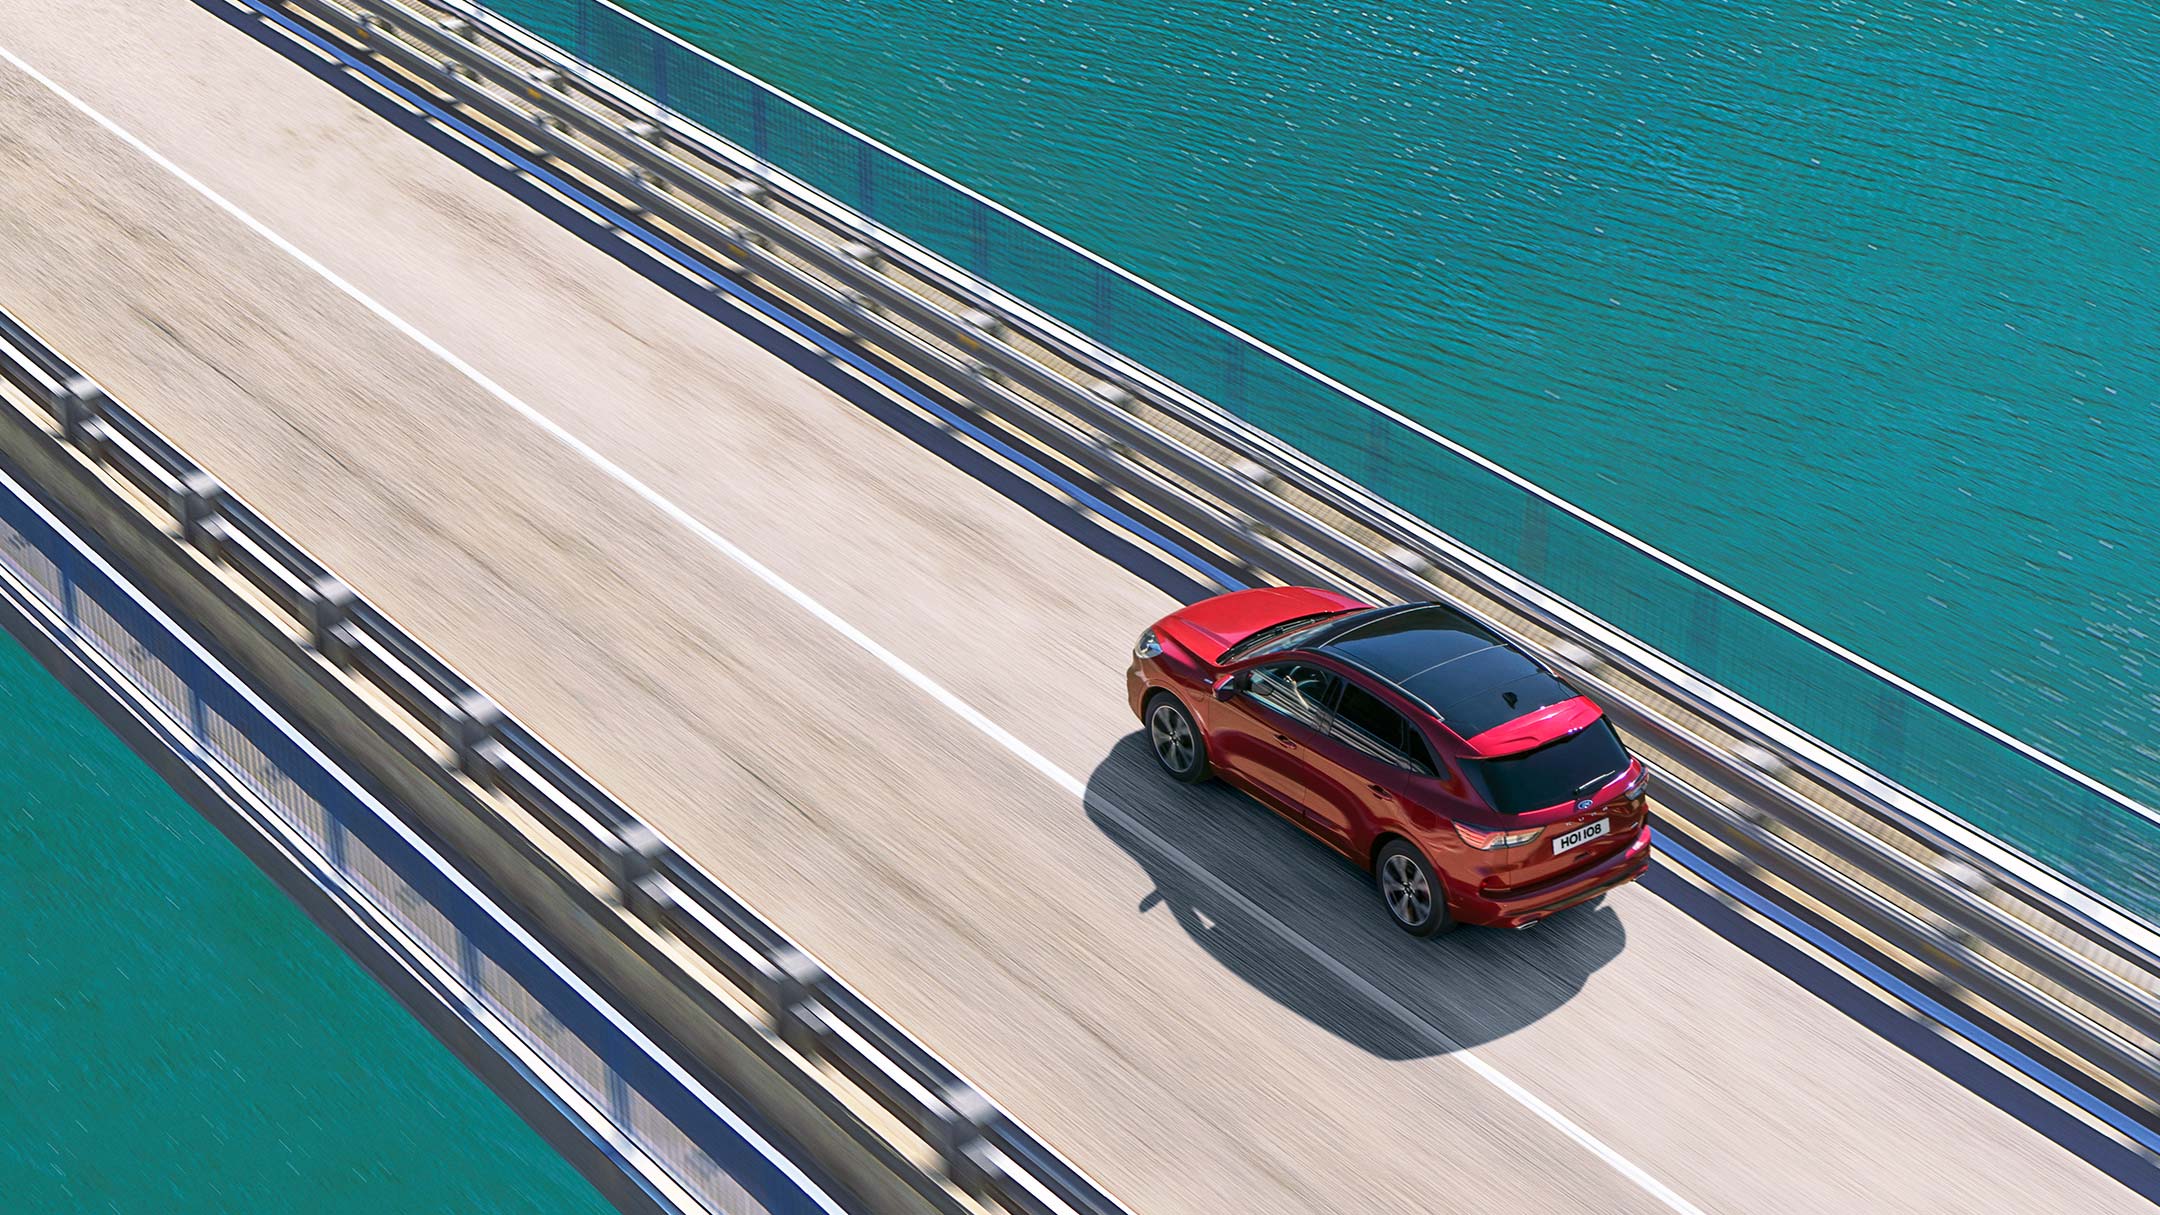 Ford Kuga driver assistance pack